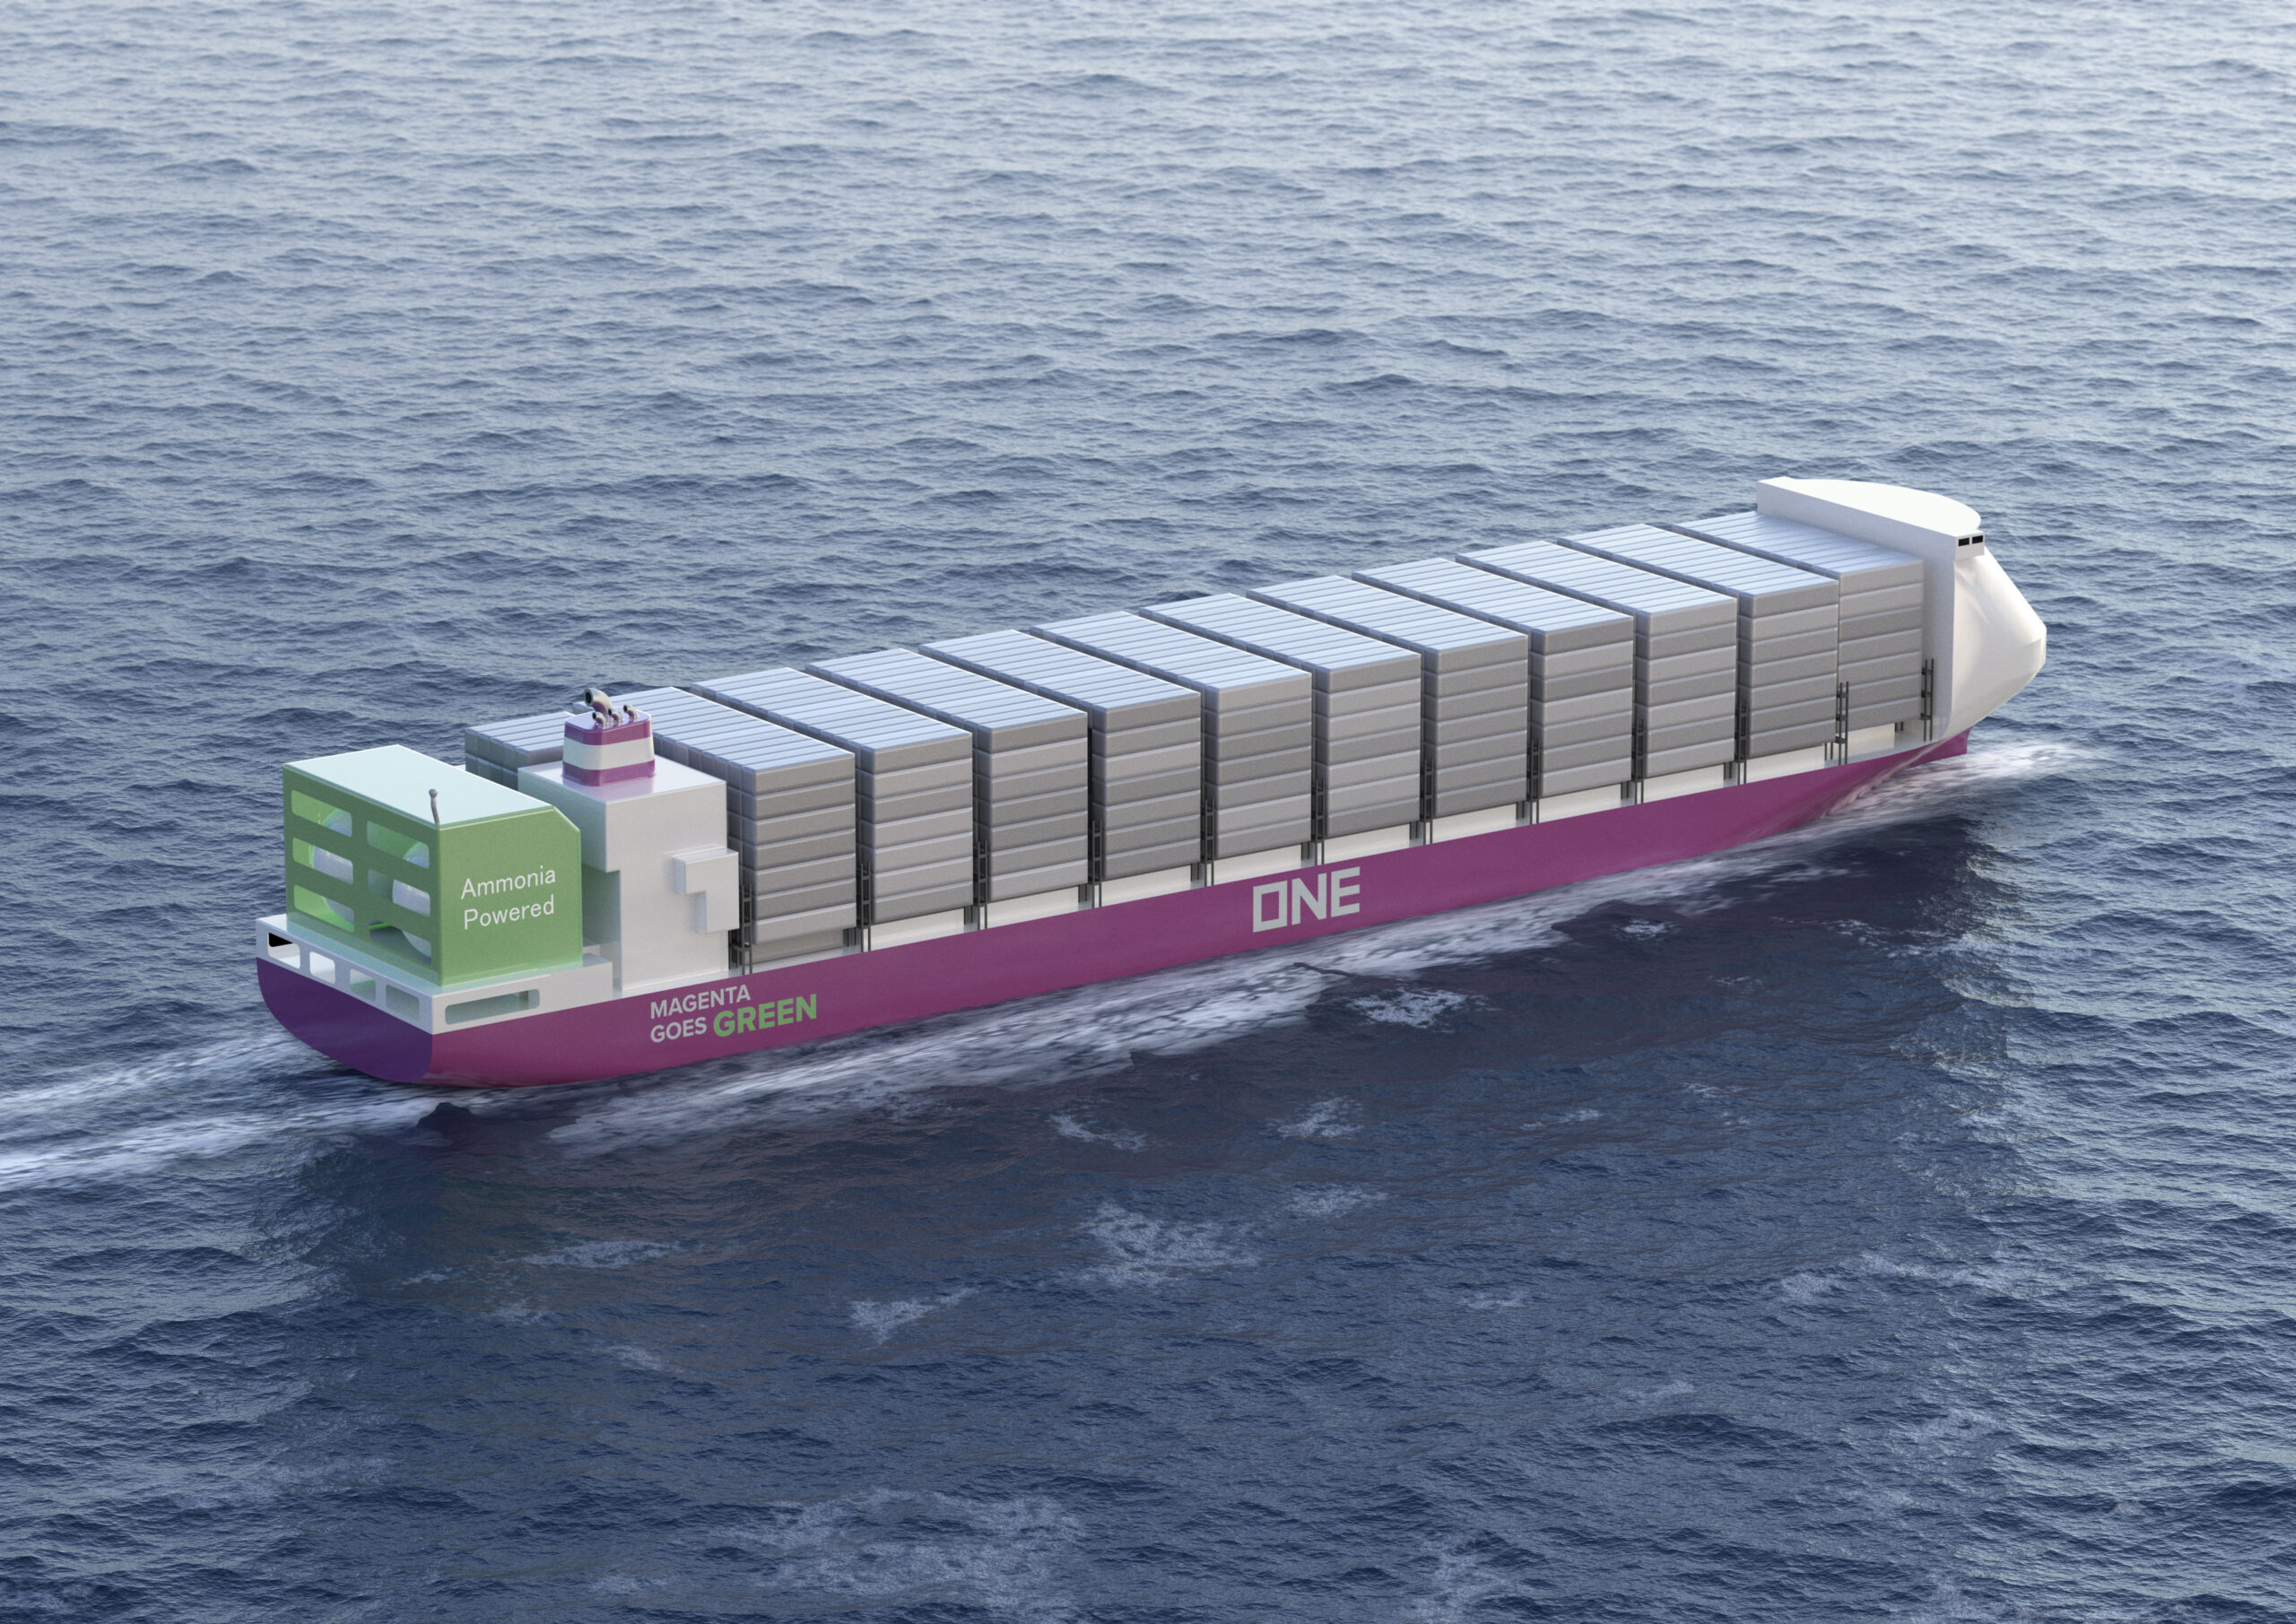 An illustration of ONE's ammonia fueled containership